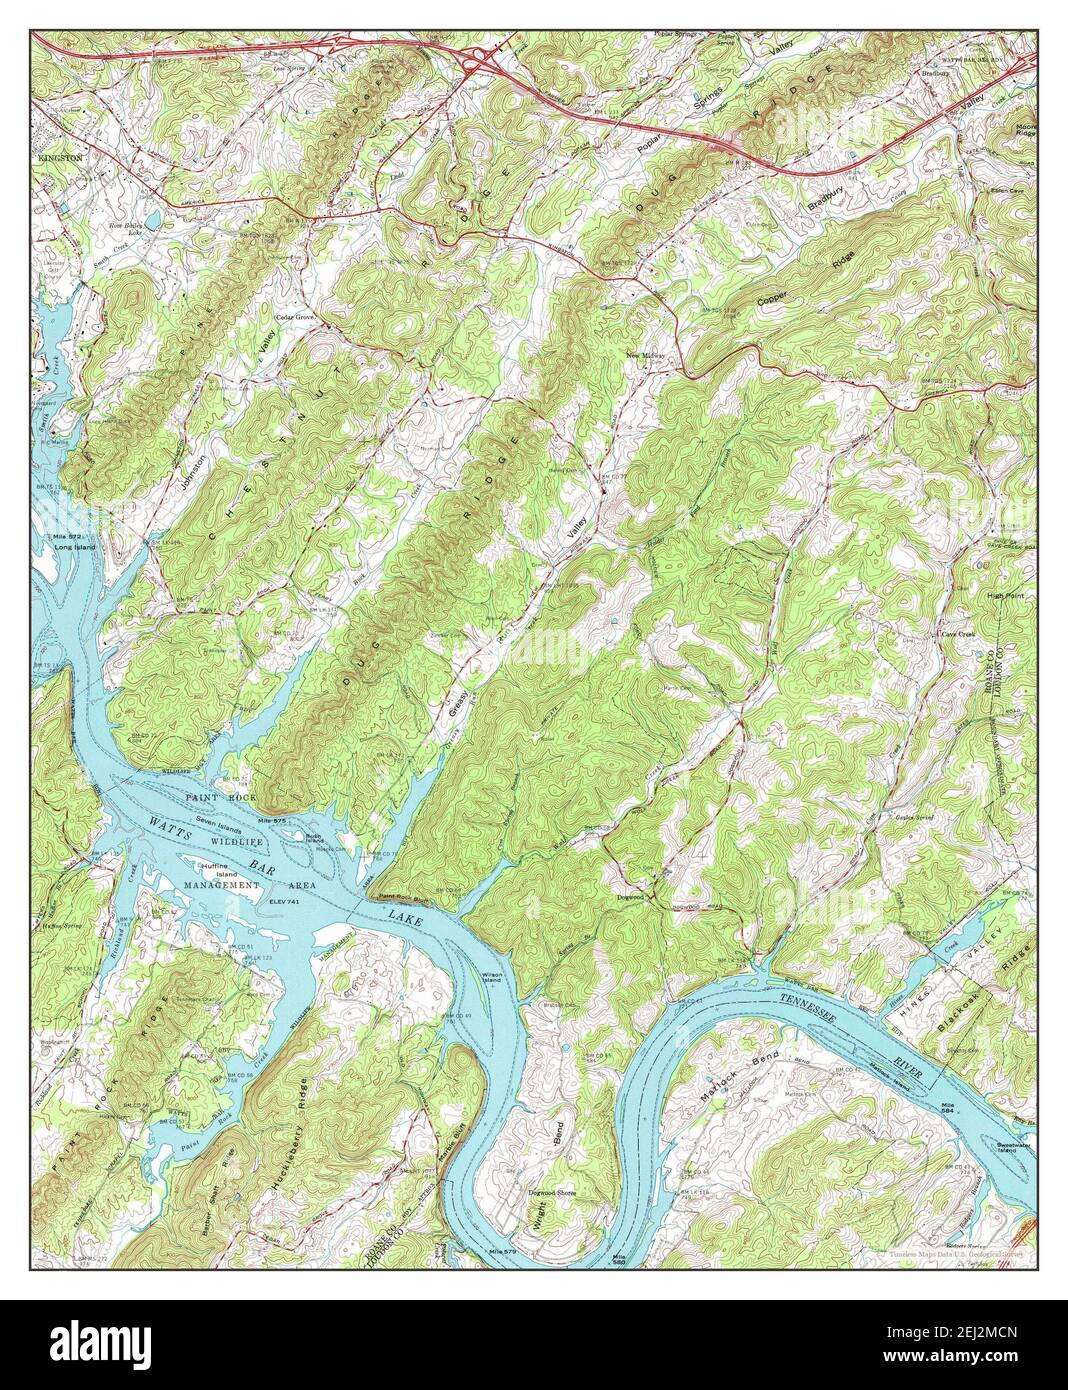 Cave Creek, Tennessee, map 1968, 1:24000, United States of America by Timeless Maps, data U.S. Geological Survey Stock Photo